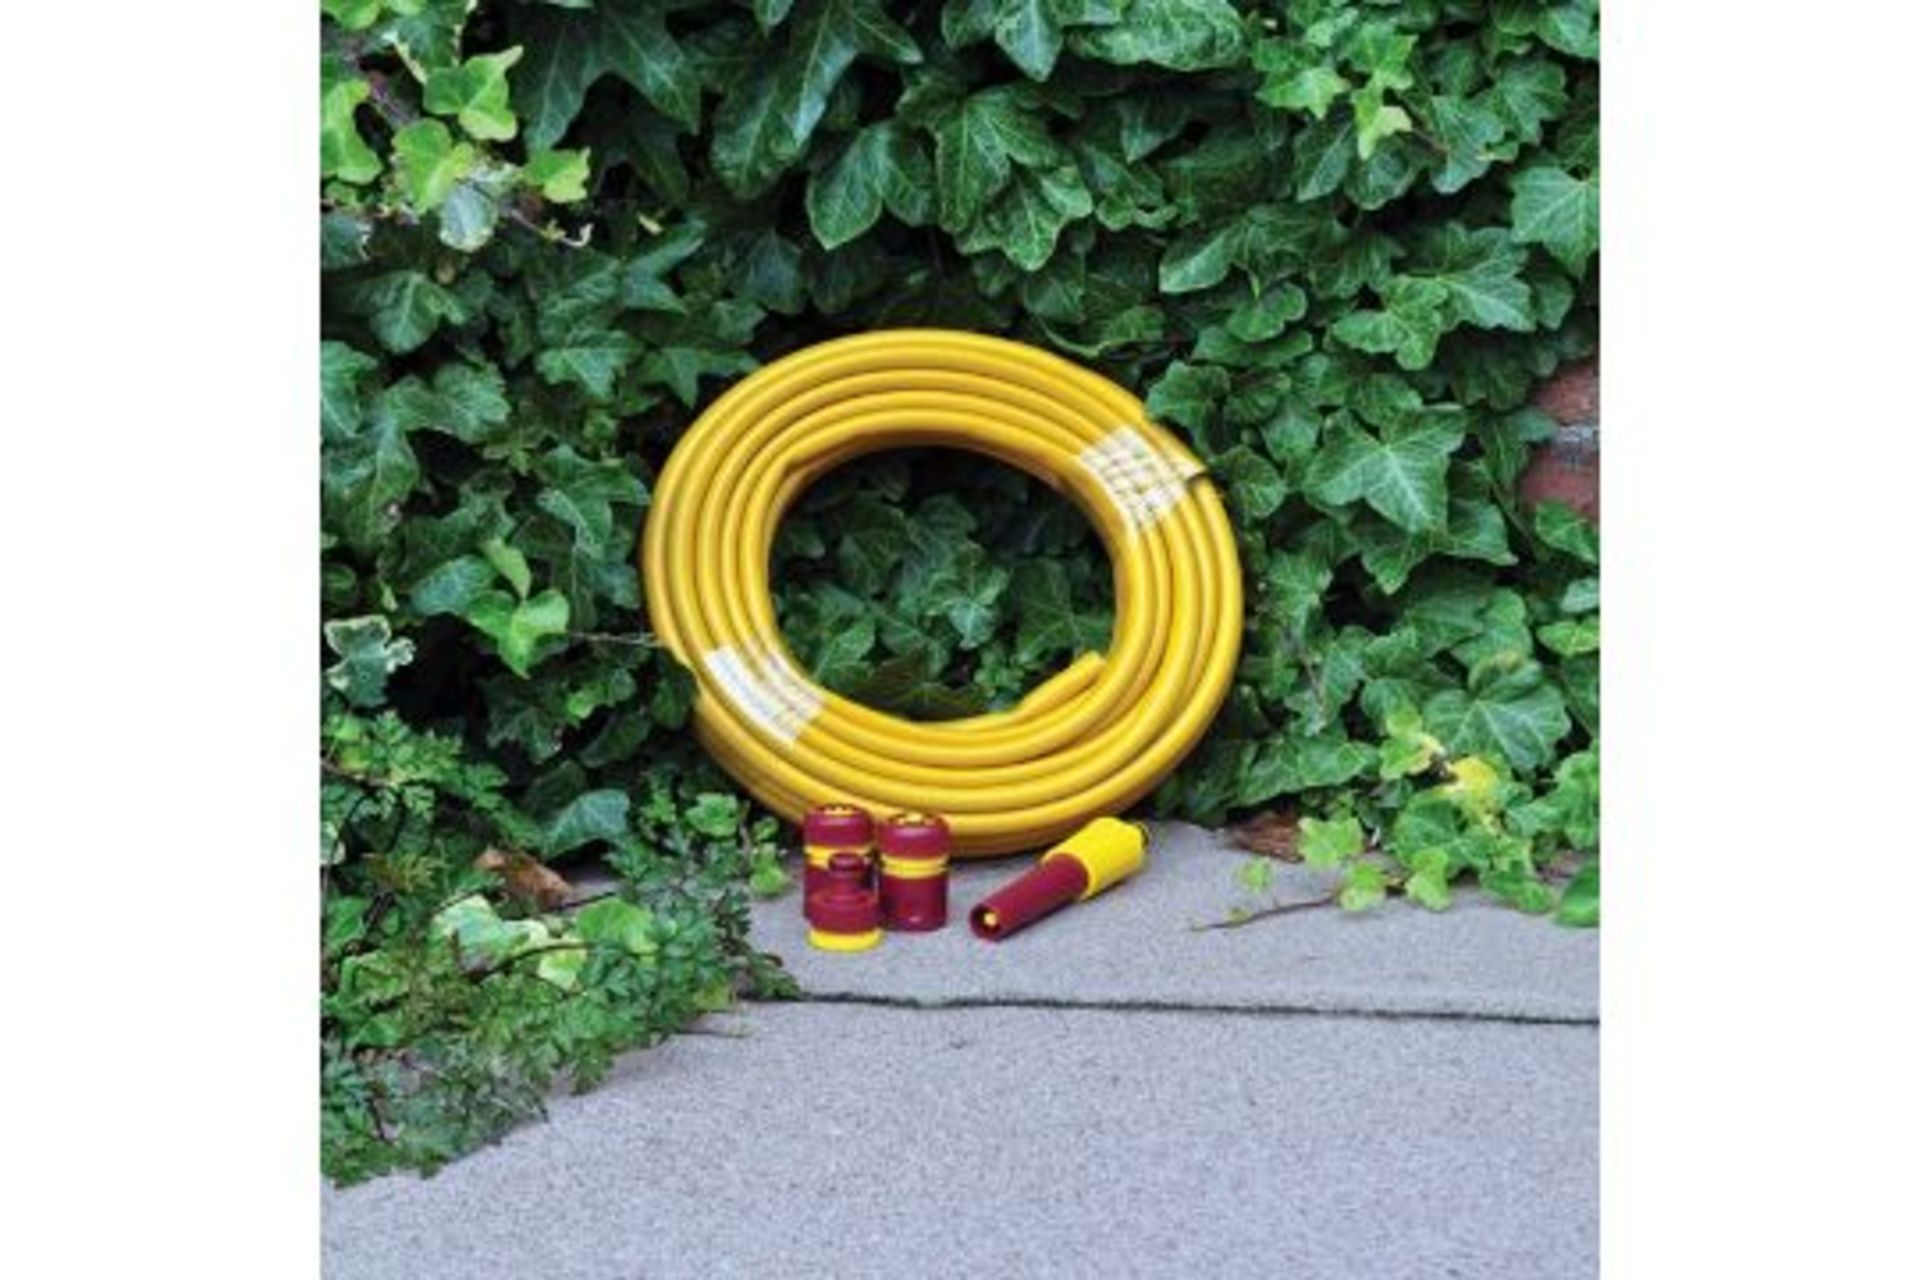 New Yellow 15M Garden Hose With Connections